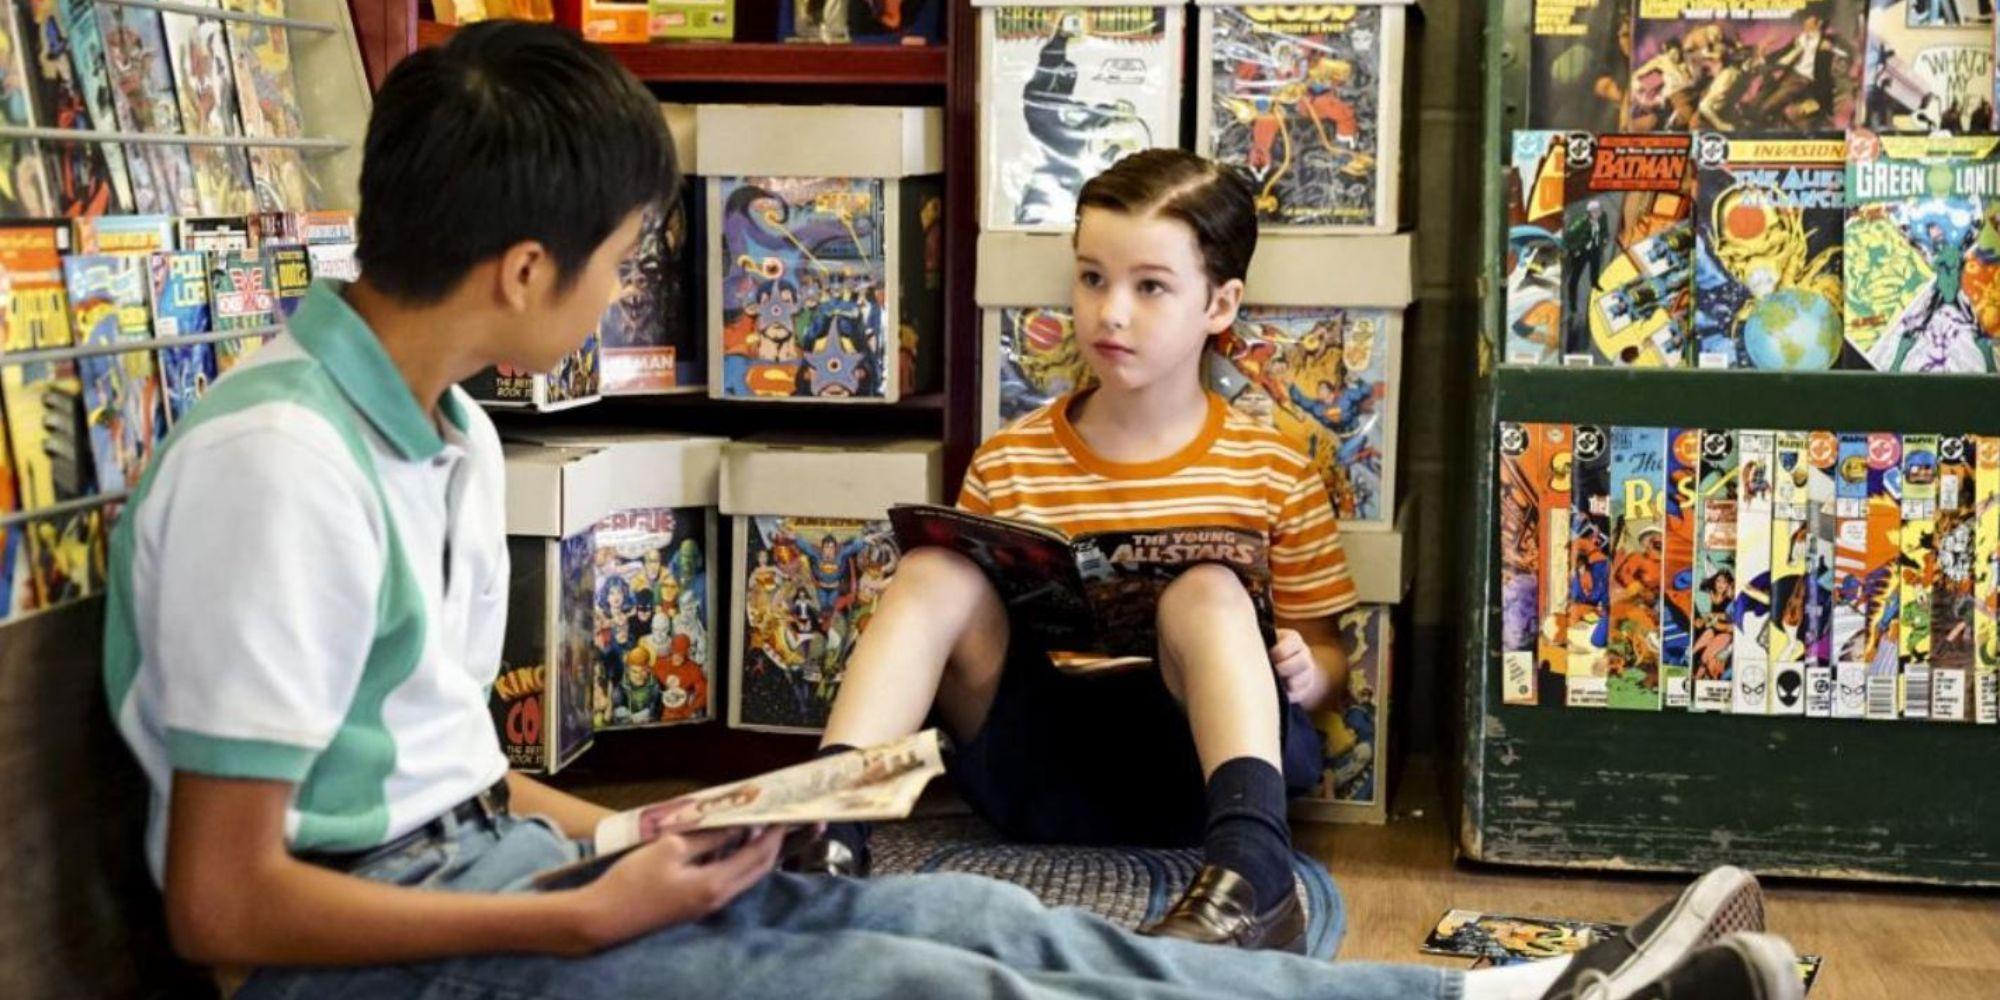 Sheldon Cooper, played by Iain Armitage, reads comic books.